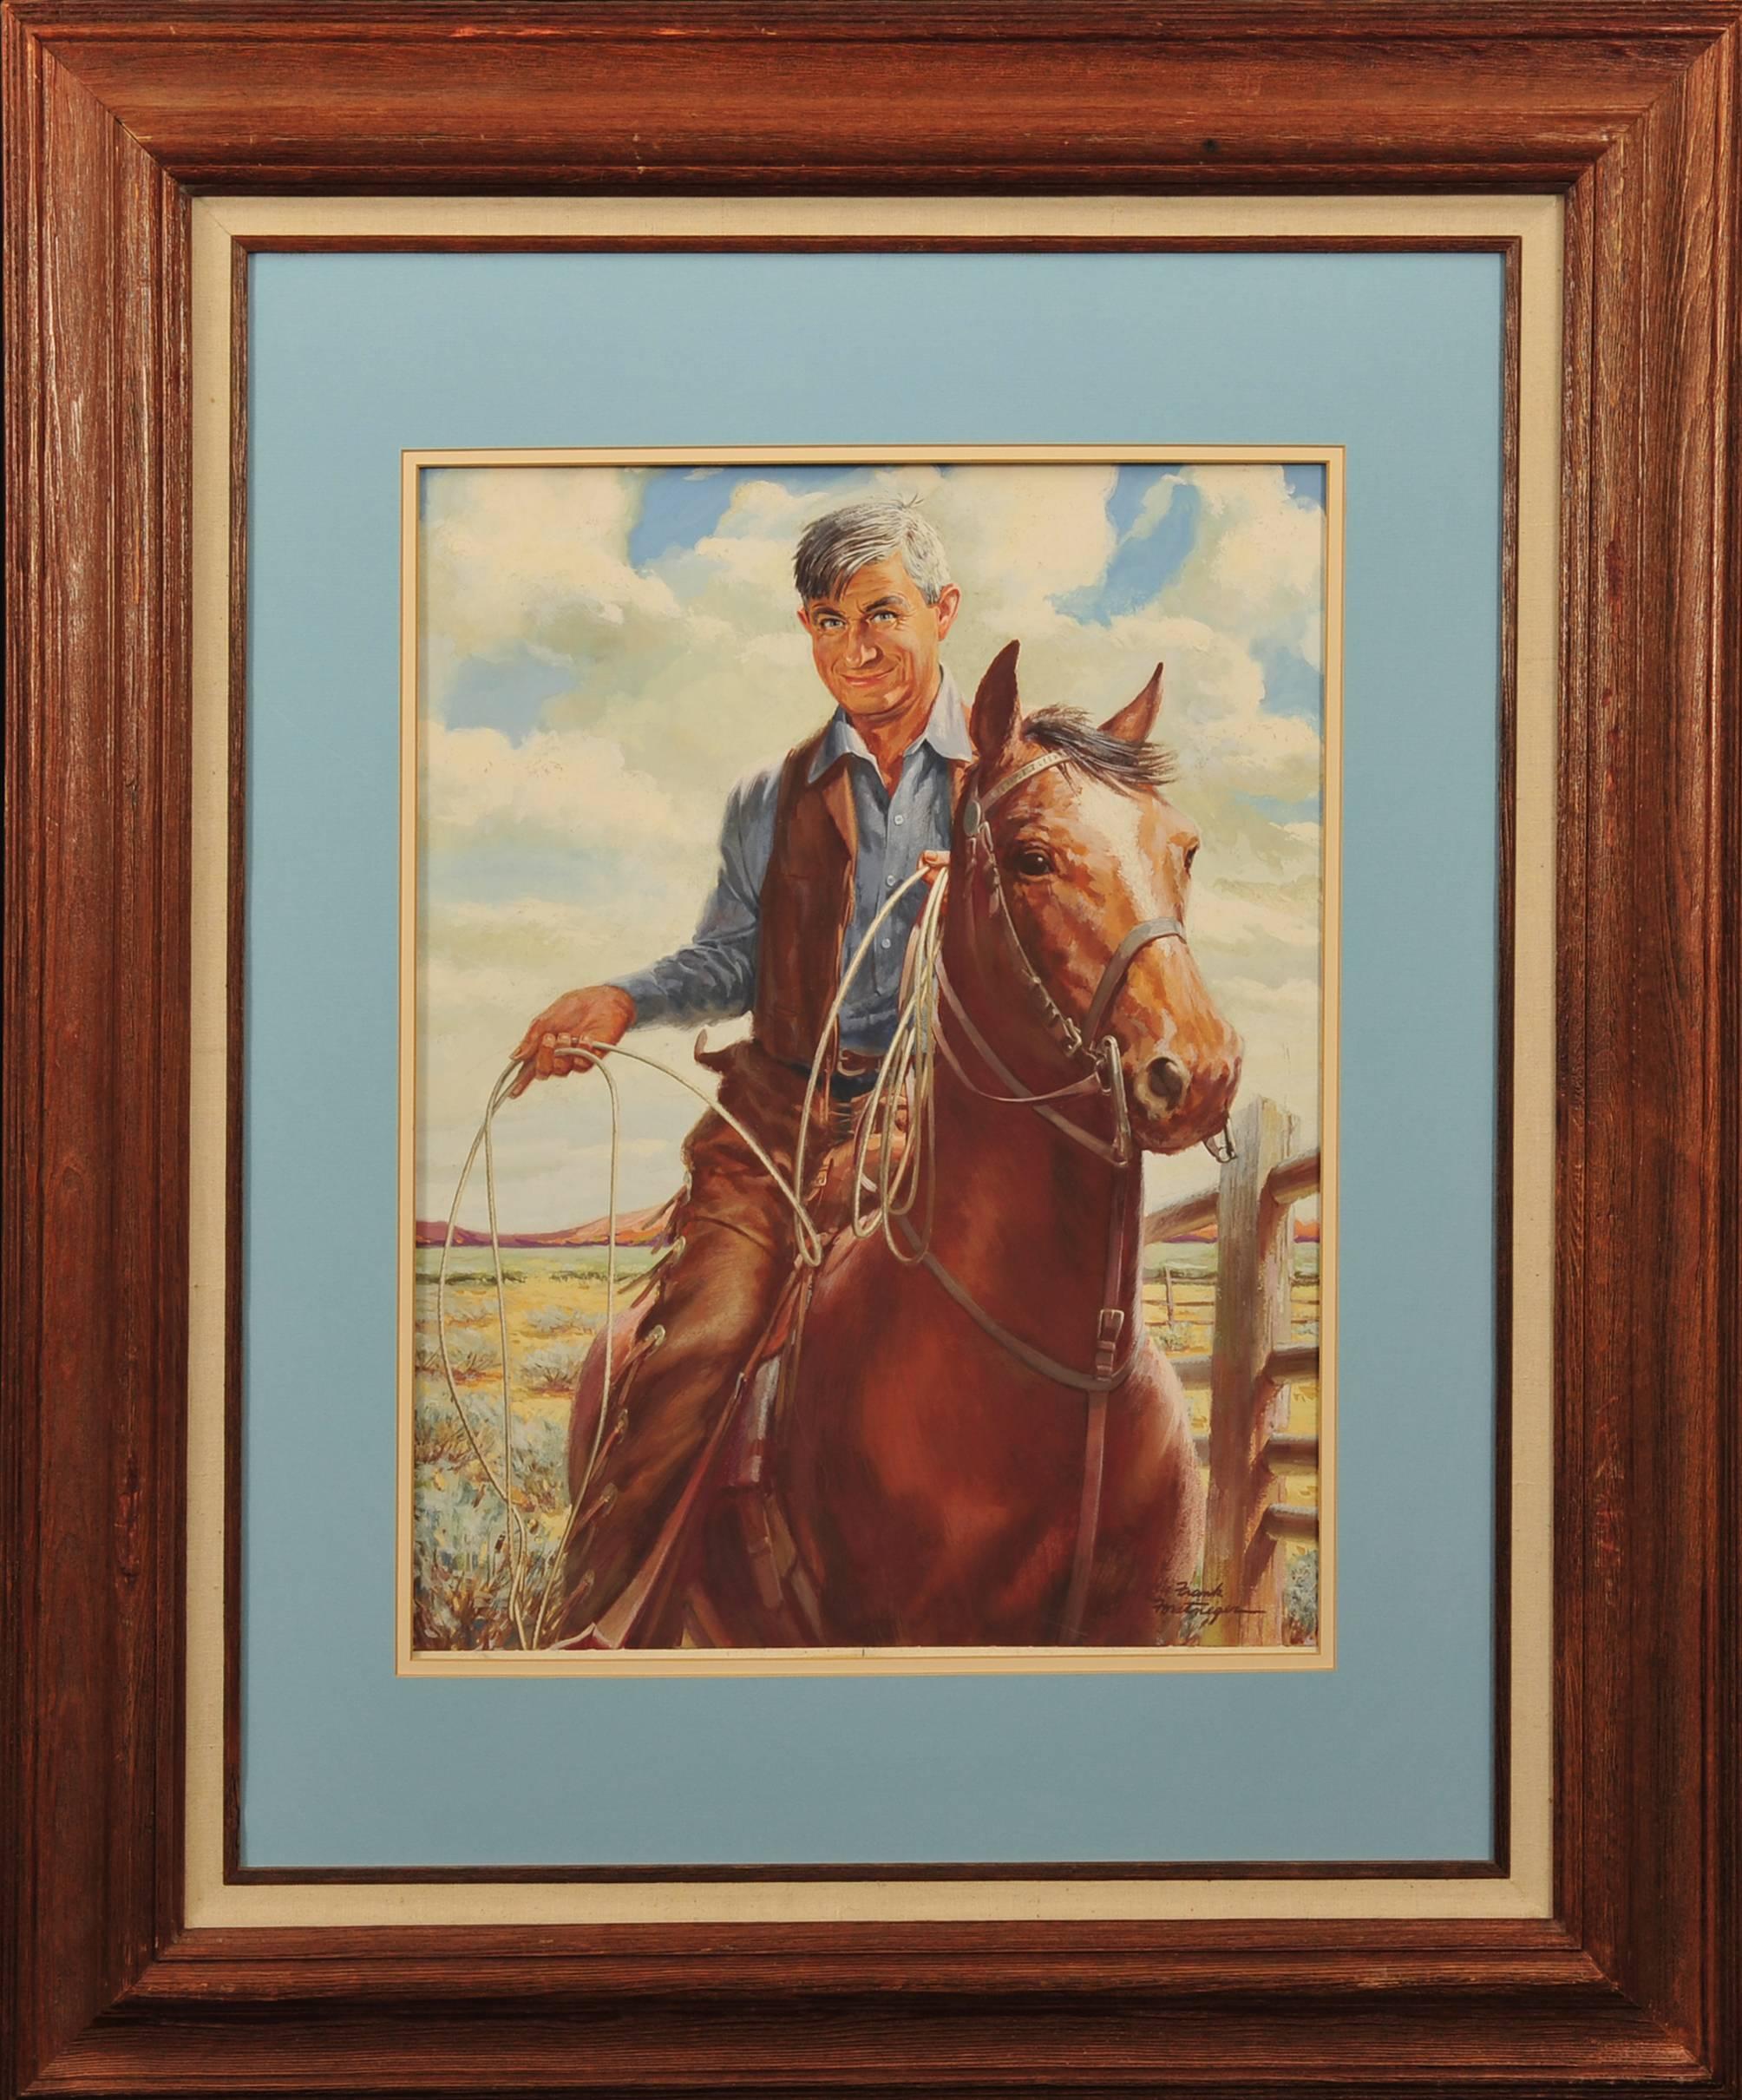 Will Rogers on a Horse, Calendar Illustration - Painting by Unknown